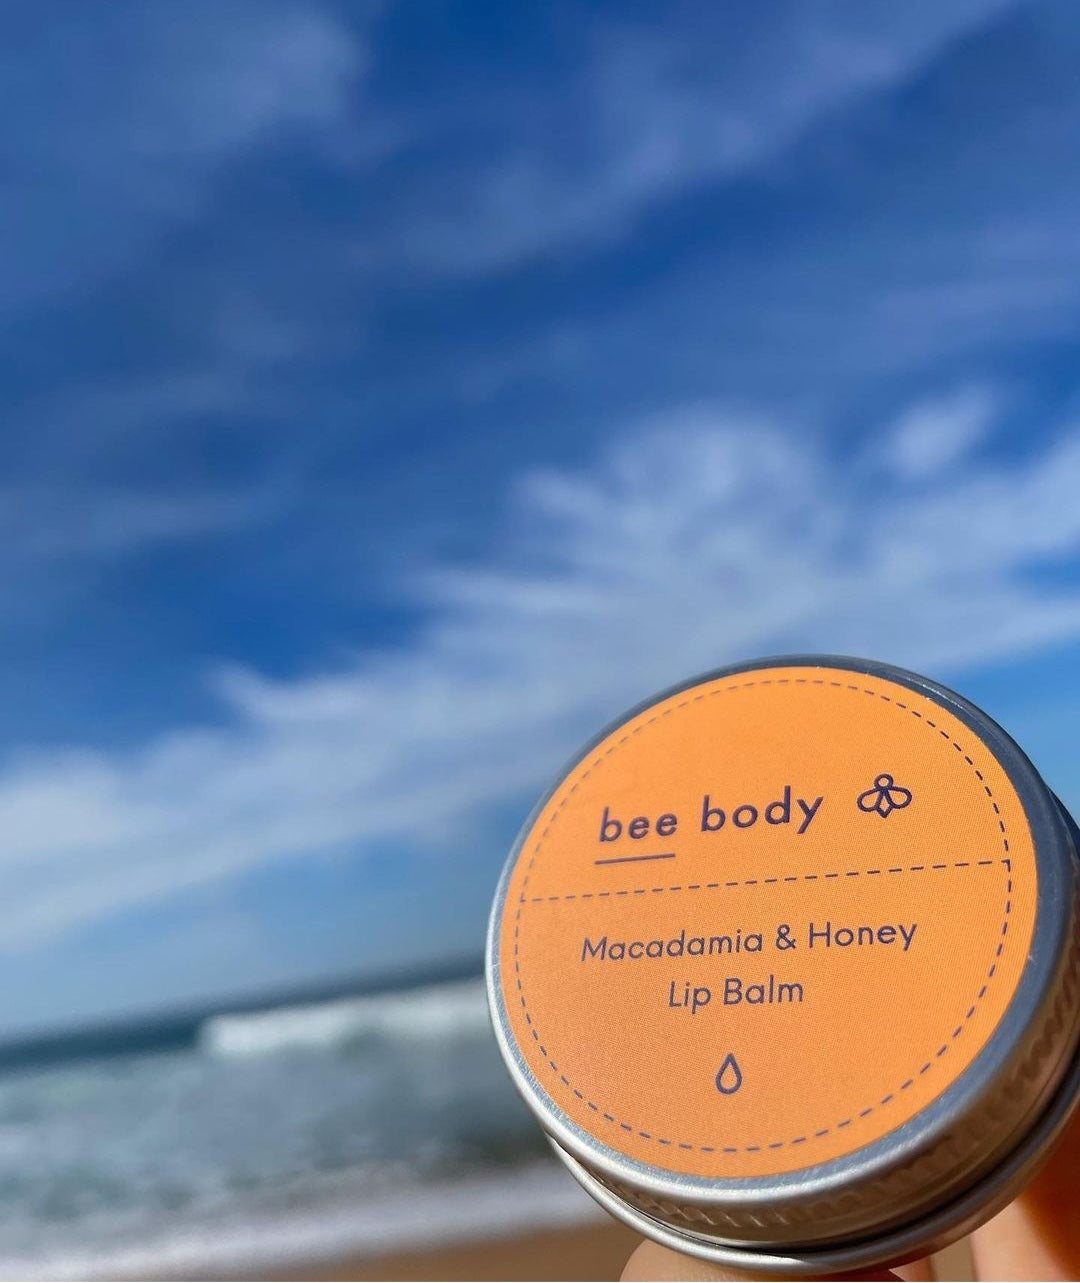 Macadamia & Honey Lip Balm: Embrace nature’s goodness with our soothing blend under a clear blue sky, set on a picturesque Australian beach.  